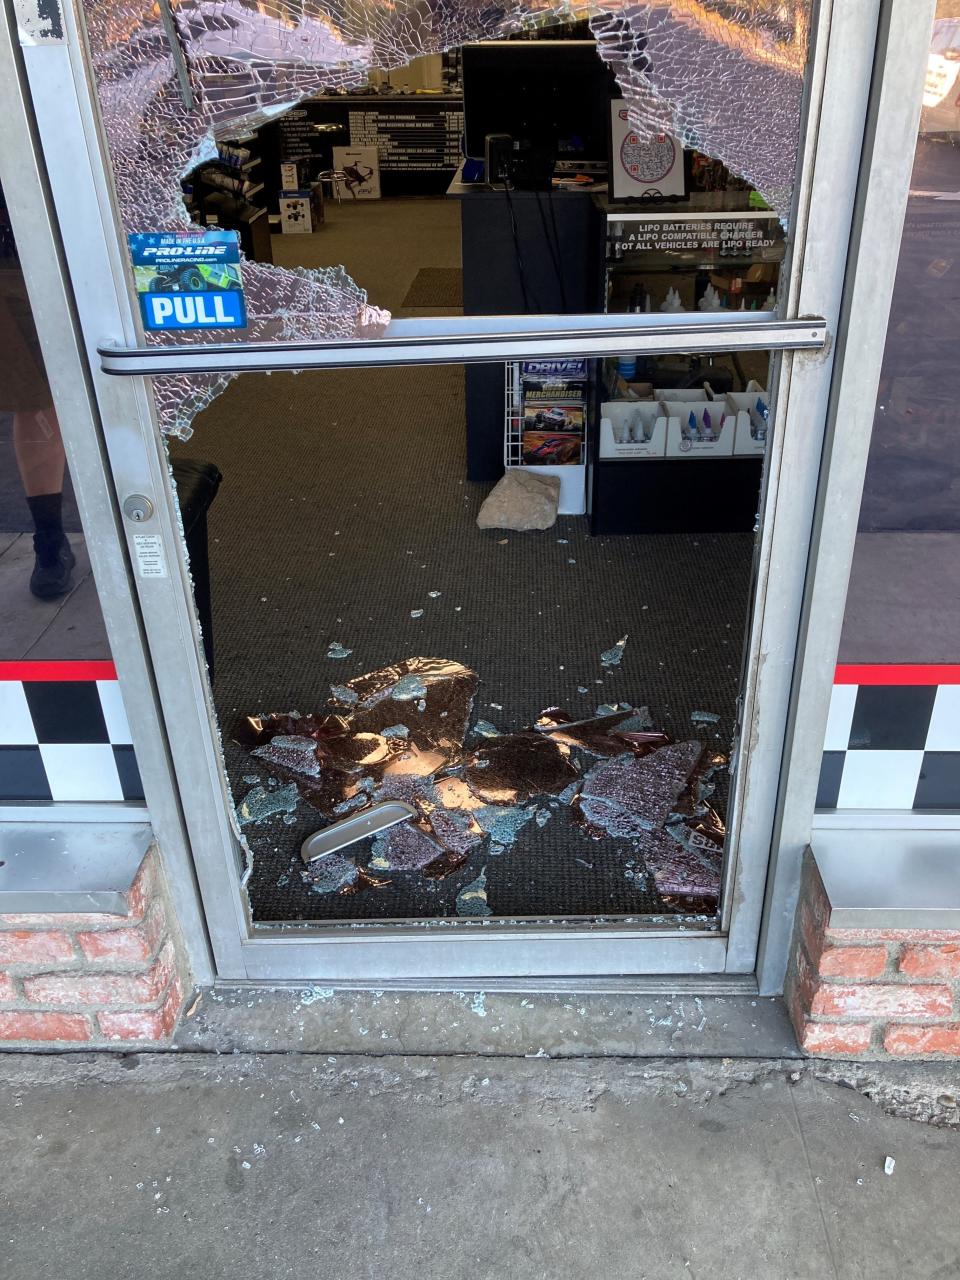 This was the aftermath of an October smash-and-grab burglary at Race Prep Hobbies in Simi Valley.